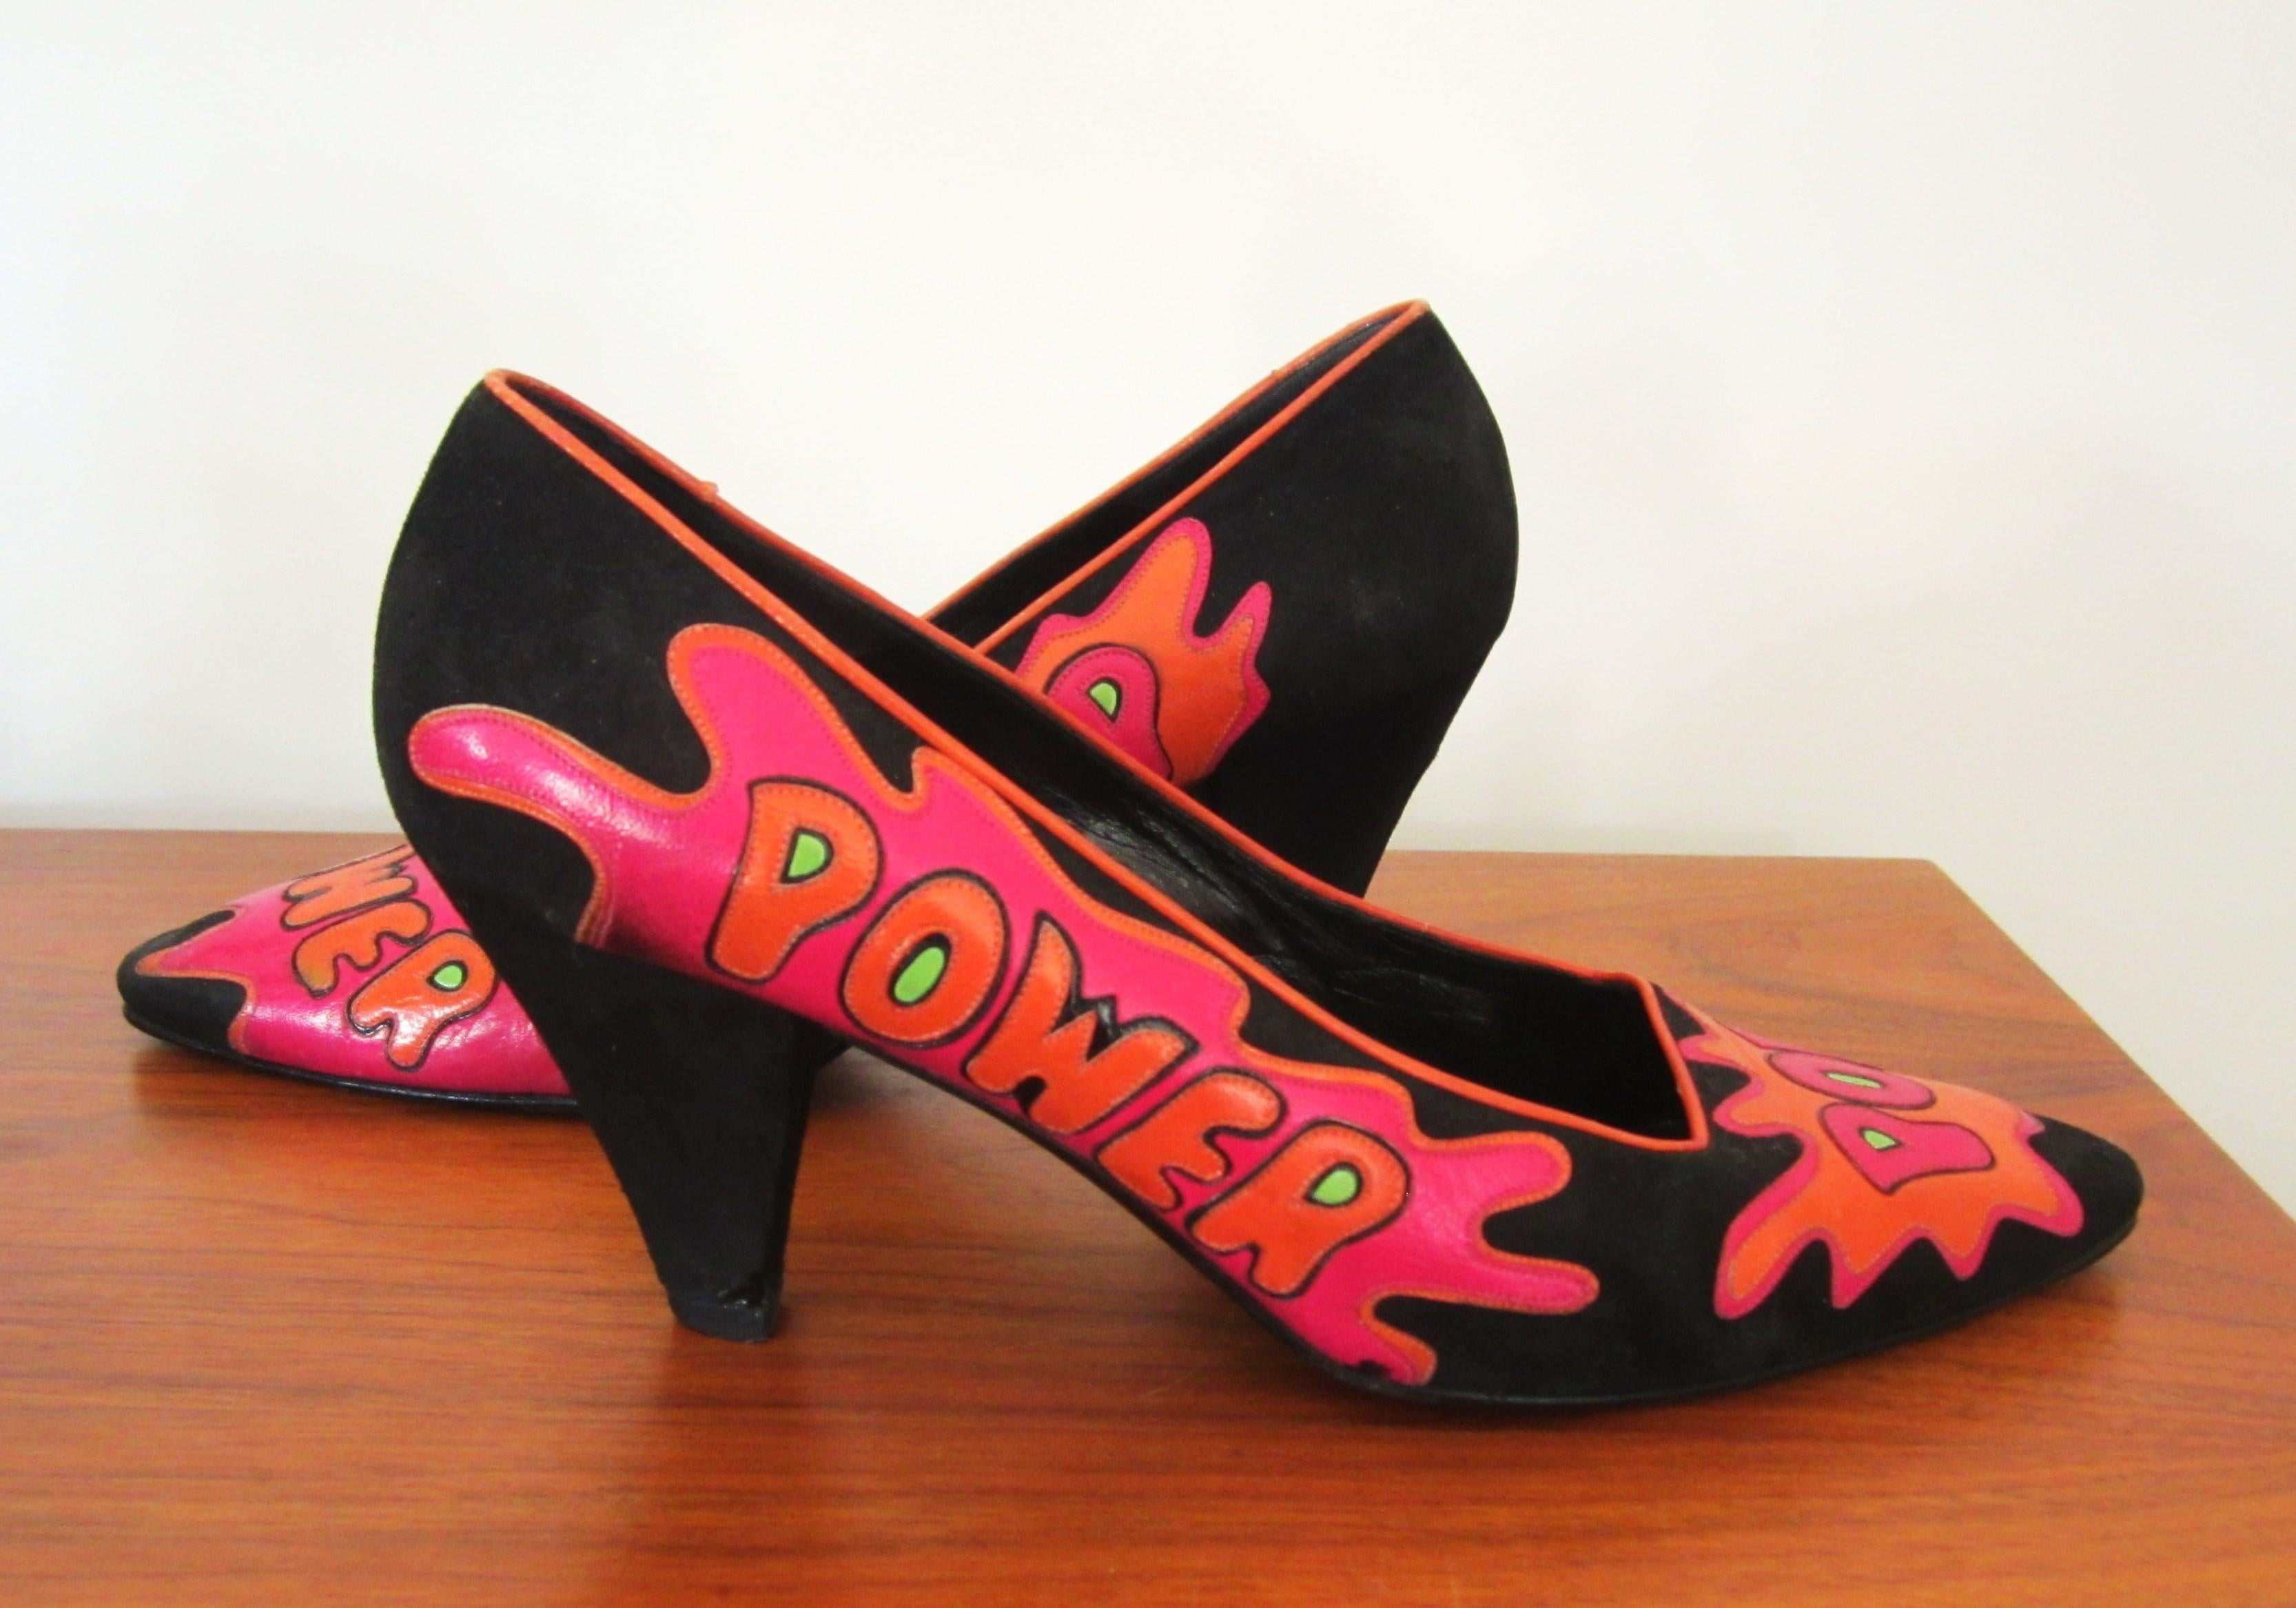 Susan Bennis / Warren Edwards POP POWER Leather Suede Pump Shoes Pop Art. These shoes are fabulous with the Pop Power graphics on the front and sides of the shoes. Circa 1984-85. In the Met 150 Archives! They are a size 8, and are on the narrow